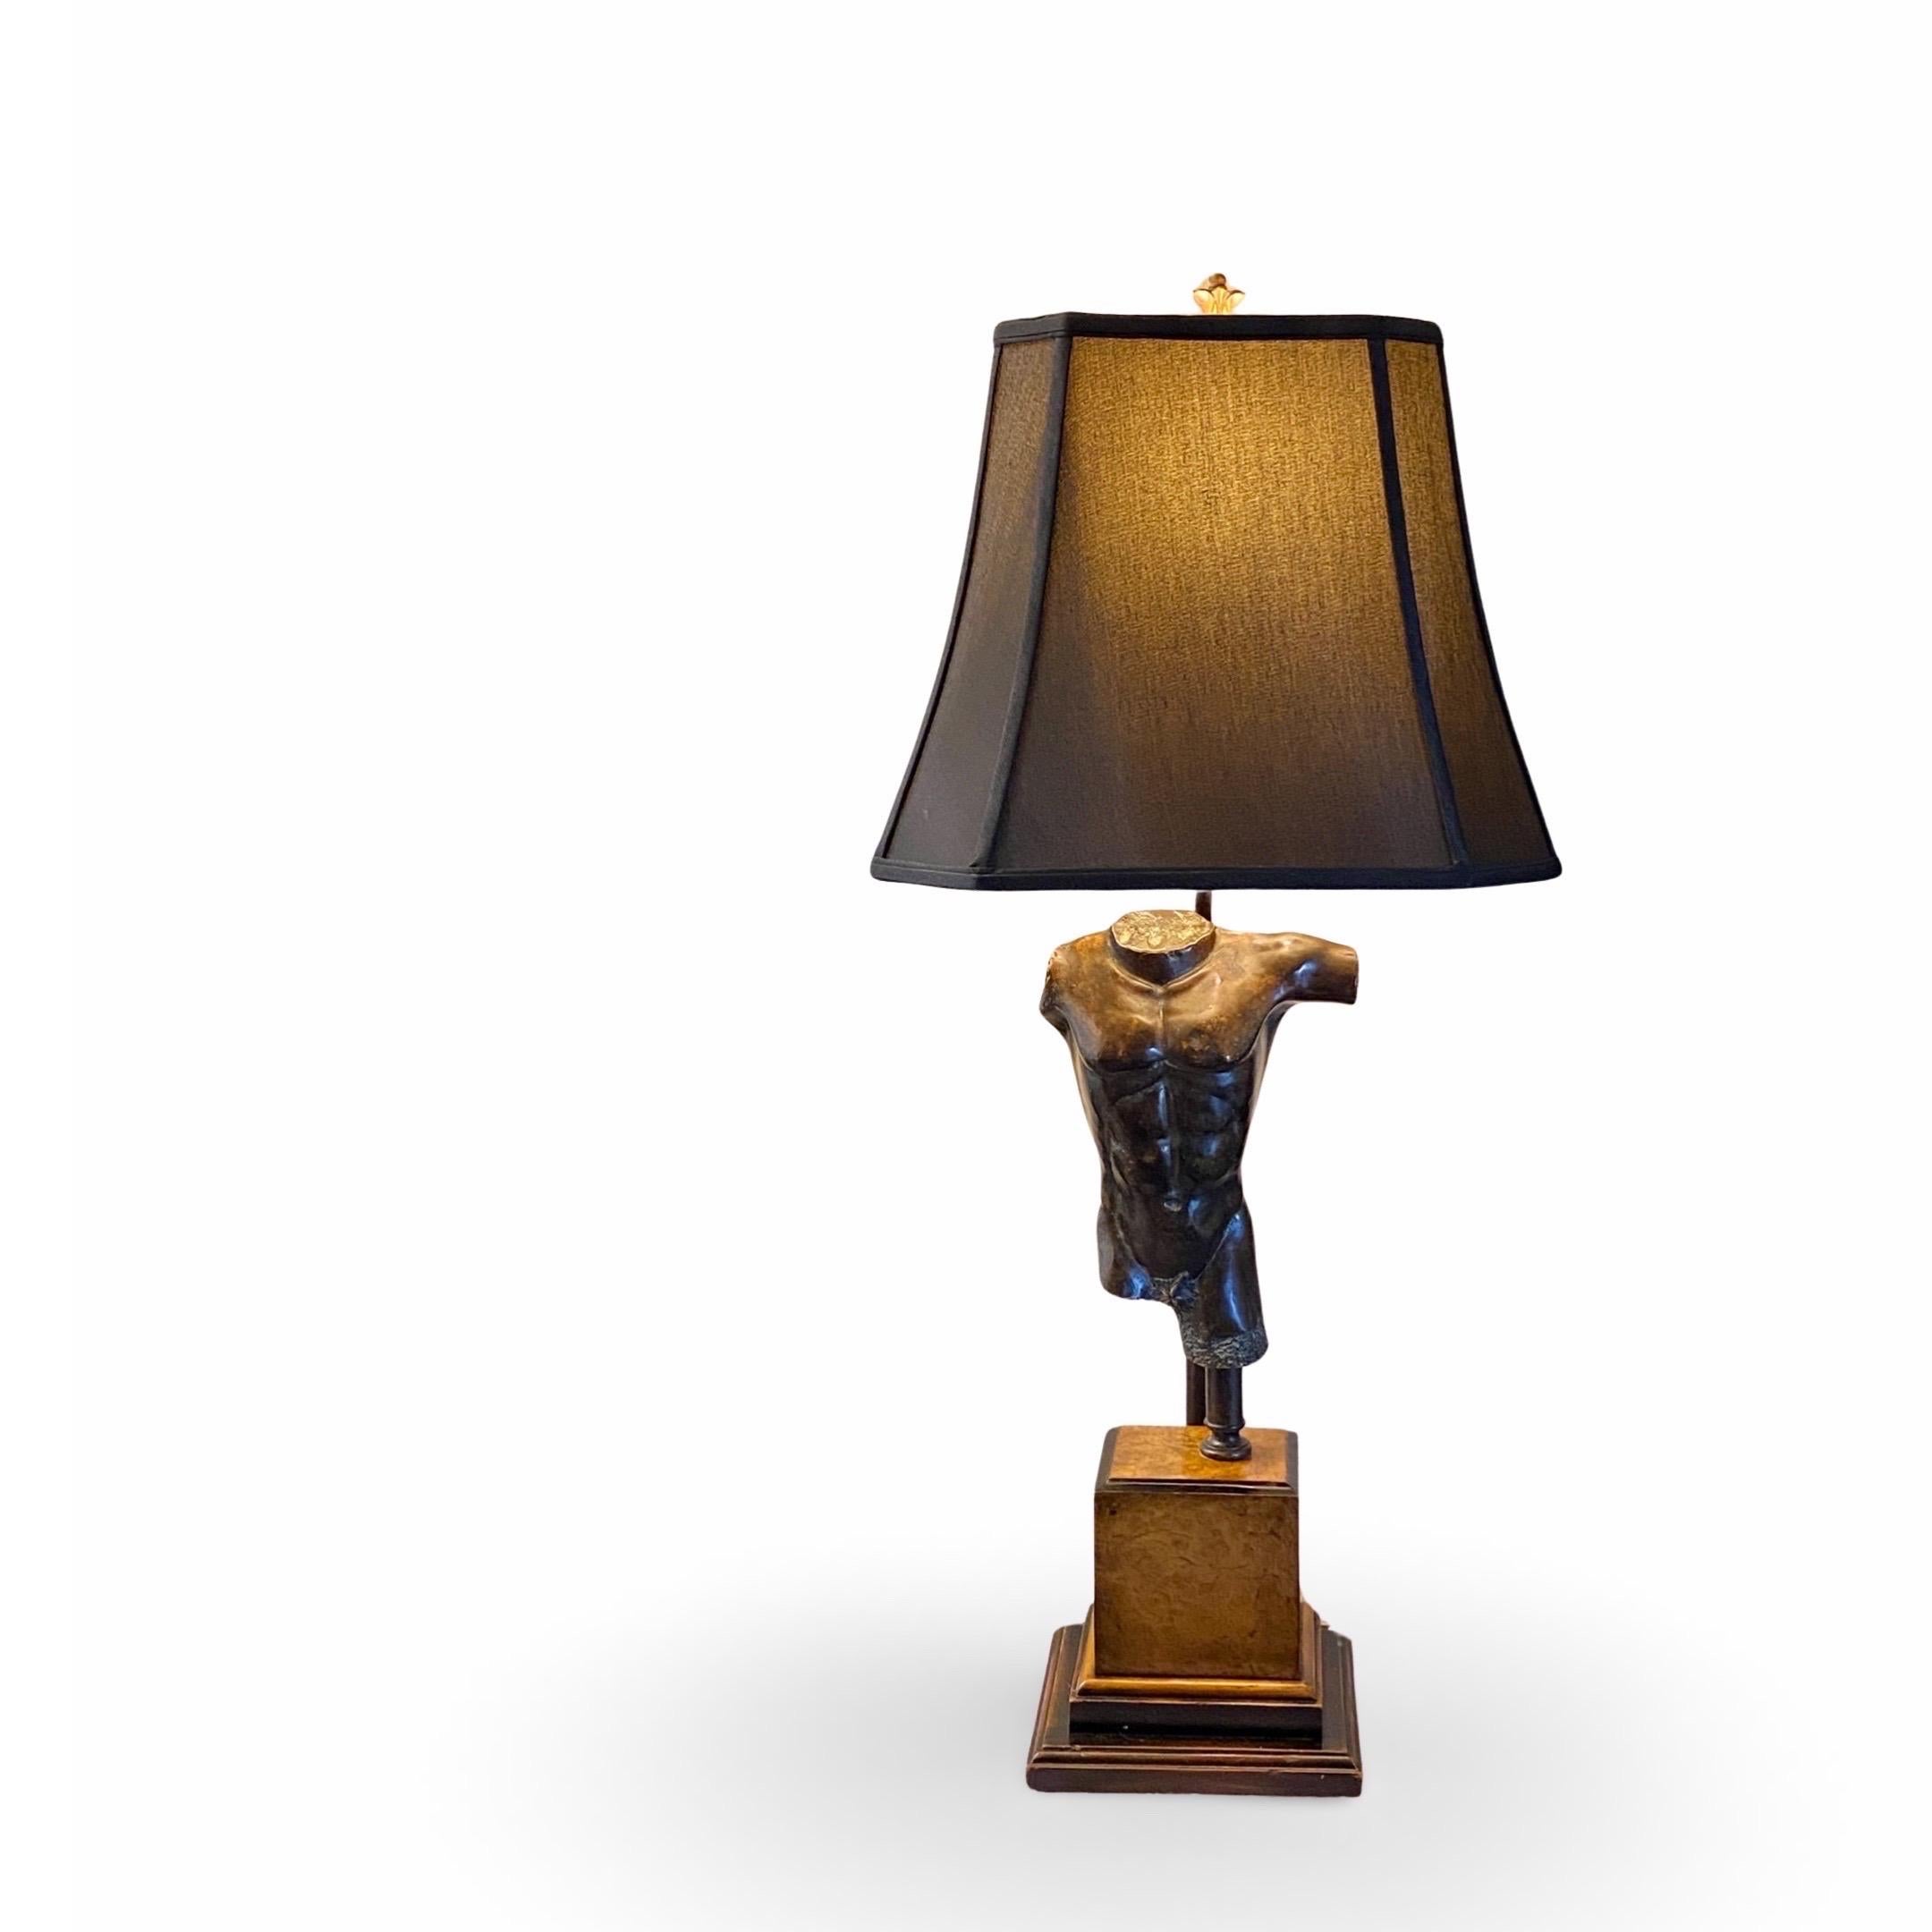 A Italian Lamp that is both classic and modern. A chic bronze statue on a burl wood cube base. Beautifully made as only the Italians can do. We custom ordered a black fabric shade that looks like the original version which was too torn to save. The